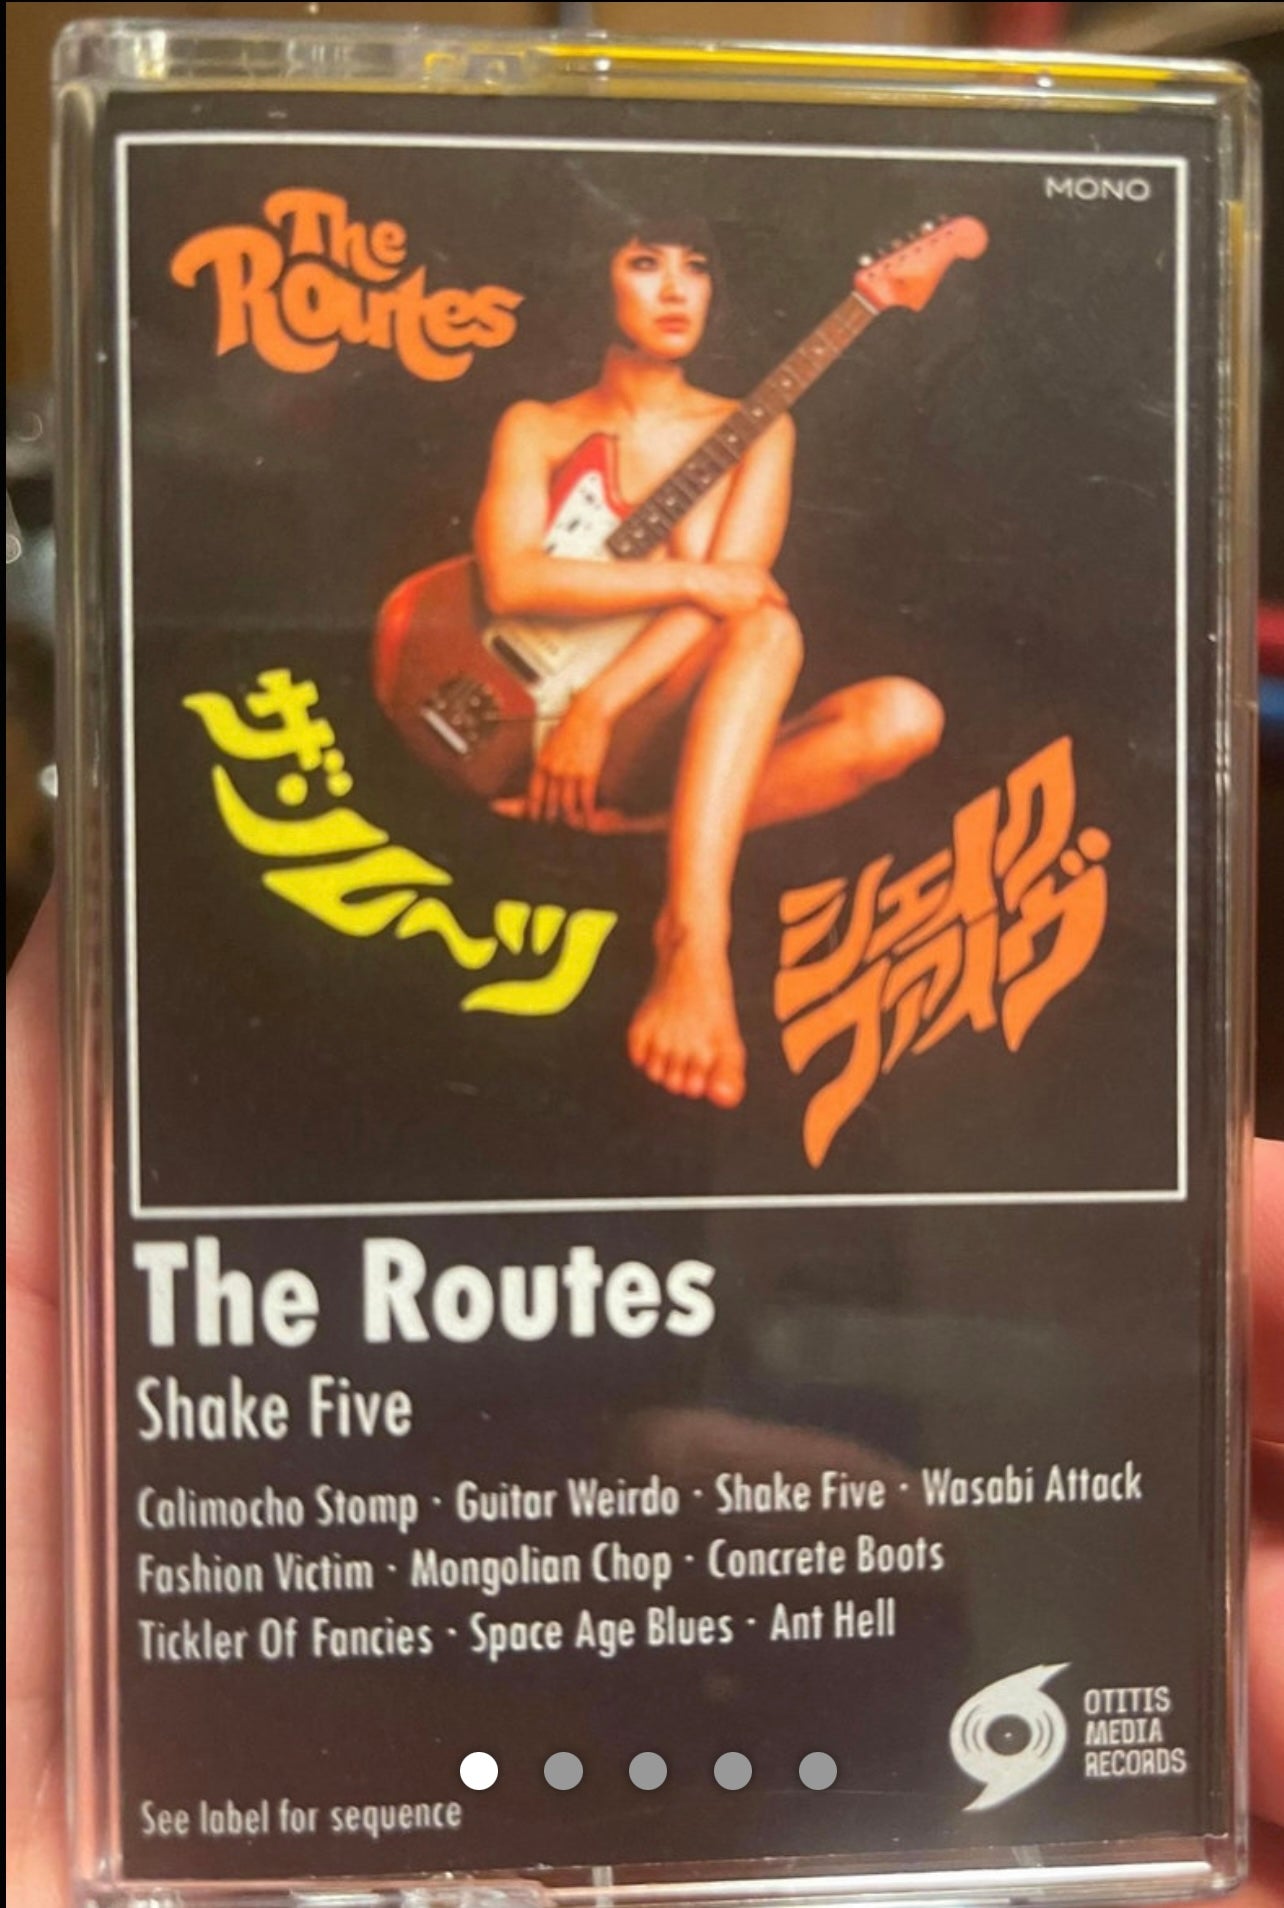 OMR-042 THE ROUTES “Shake Five” CASSETTE TAPES